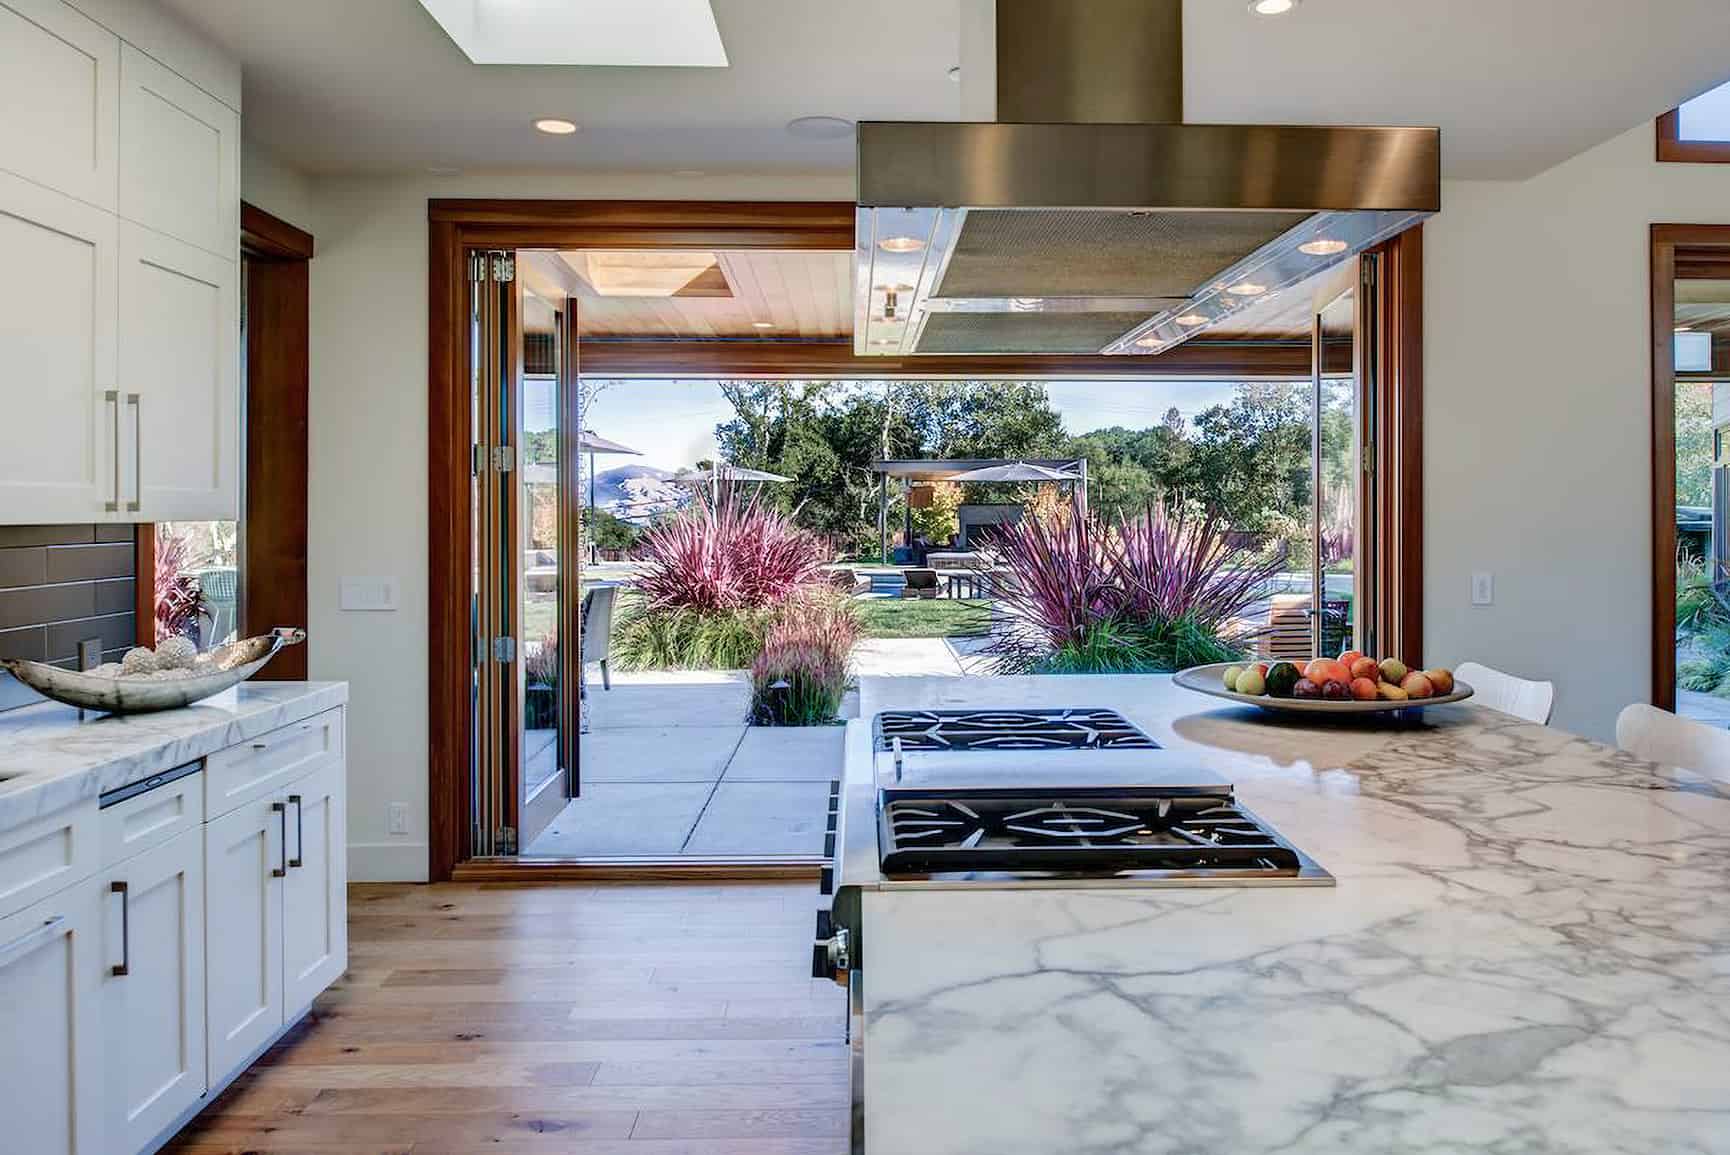 Close-up of modern kitchen countertop with views to the outdoors.